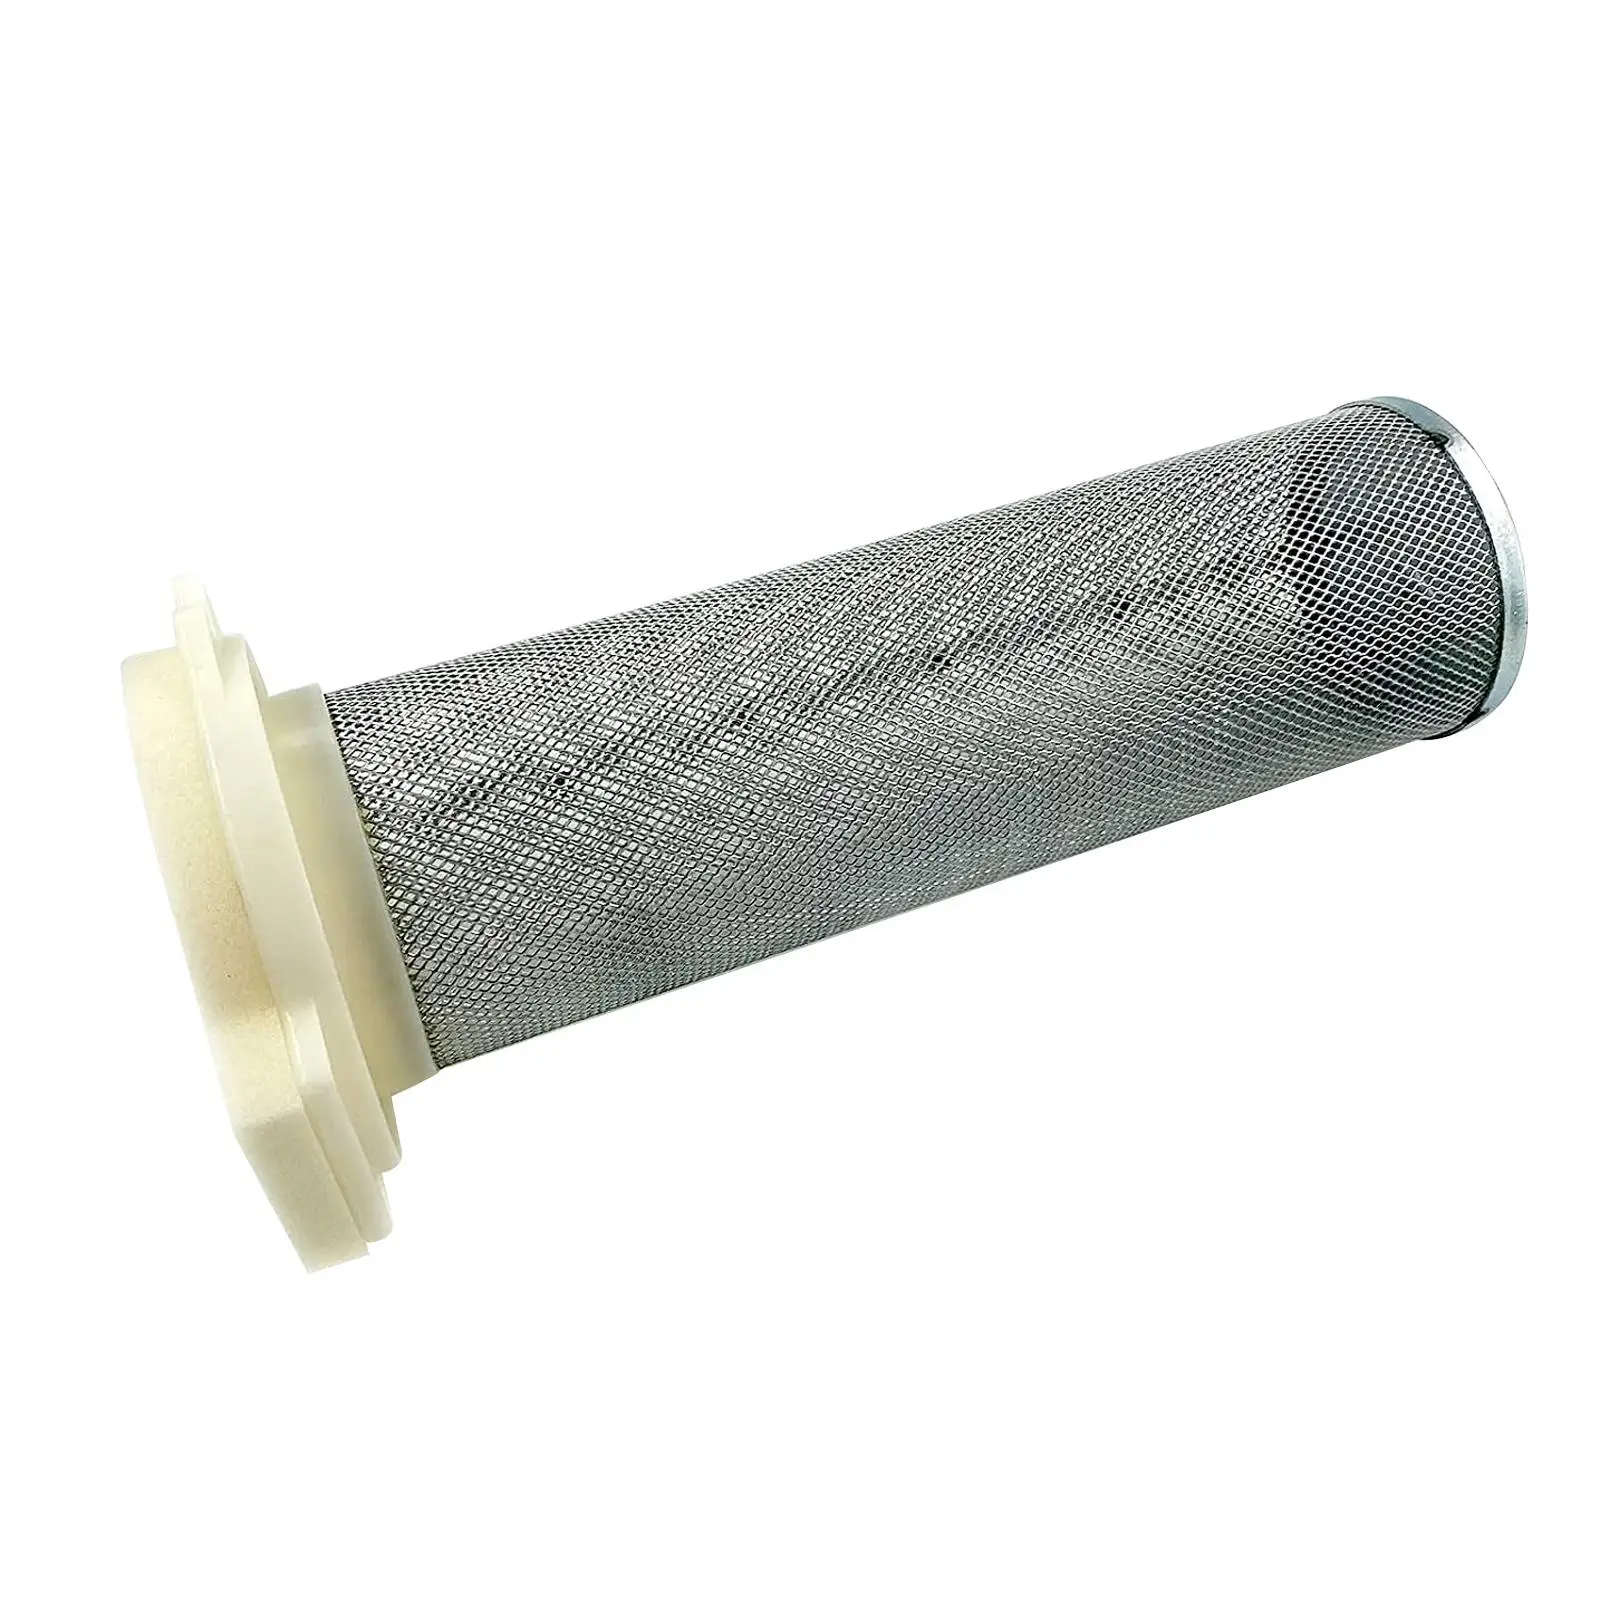 Air Filter Cage 1Uy-14458-01-00 for Yamaha Yfm 350 Replacement Accessory